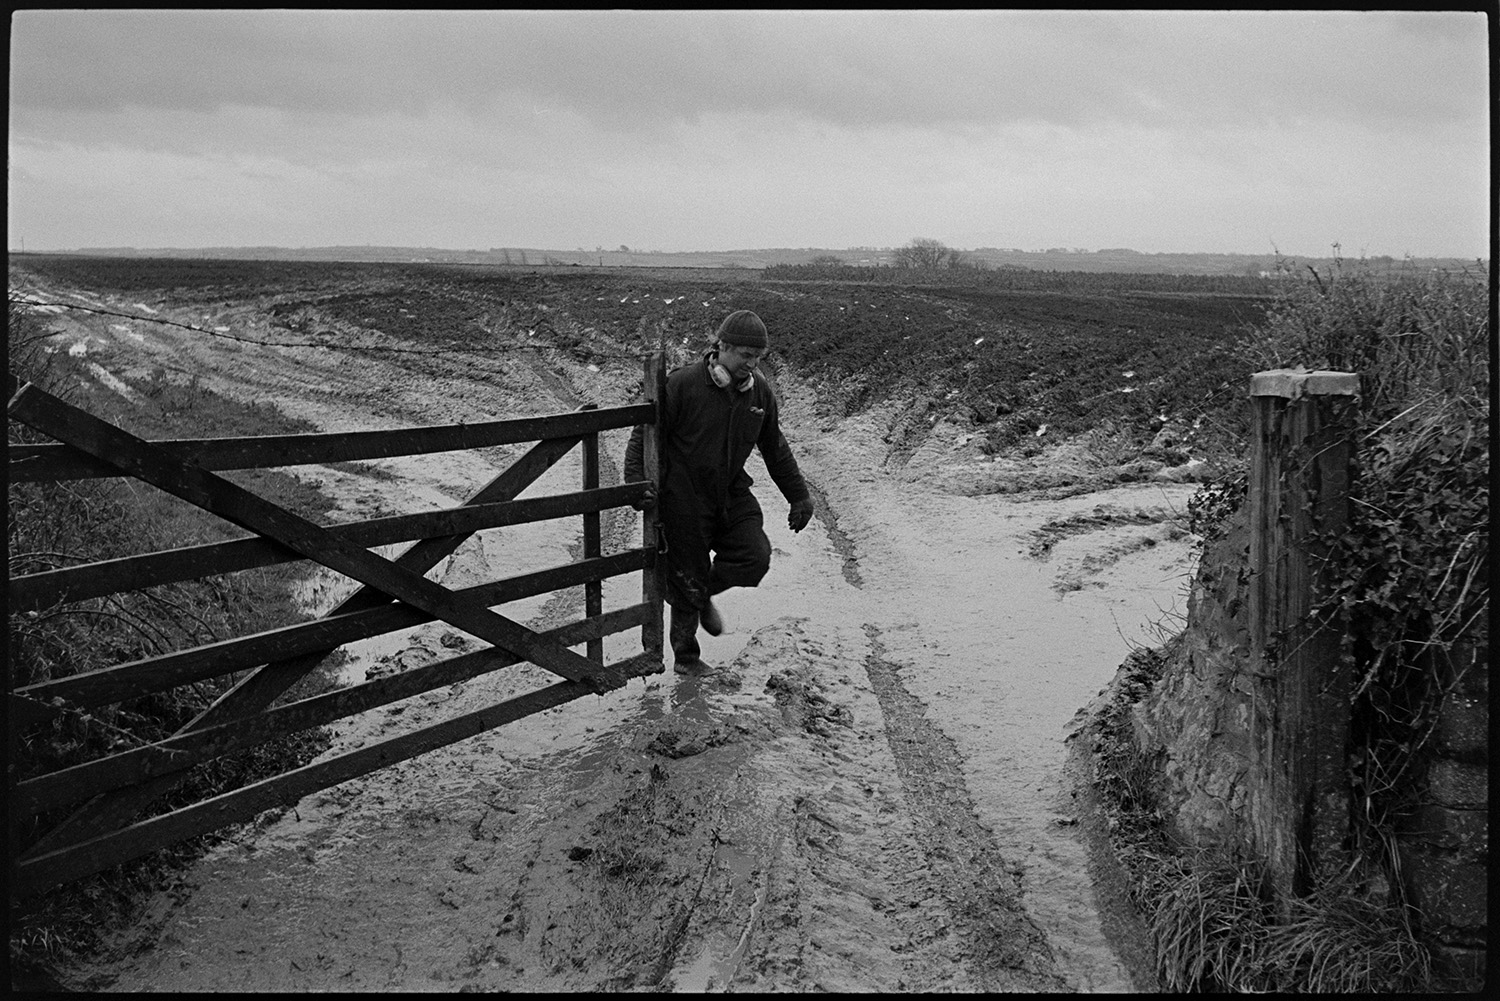 Very muddy field with farmer muckspreading in distance.
[A farmer wearing overalls and ear defenders closing a wooden gate in a very muddy field entrance at Ashreigney.]